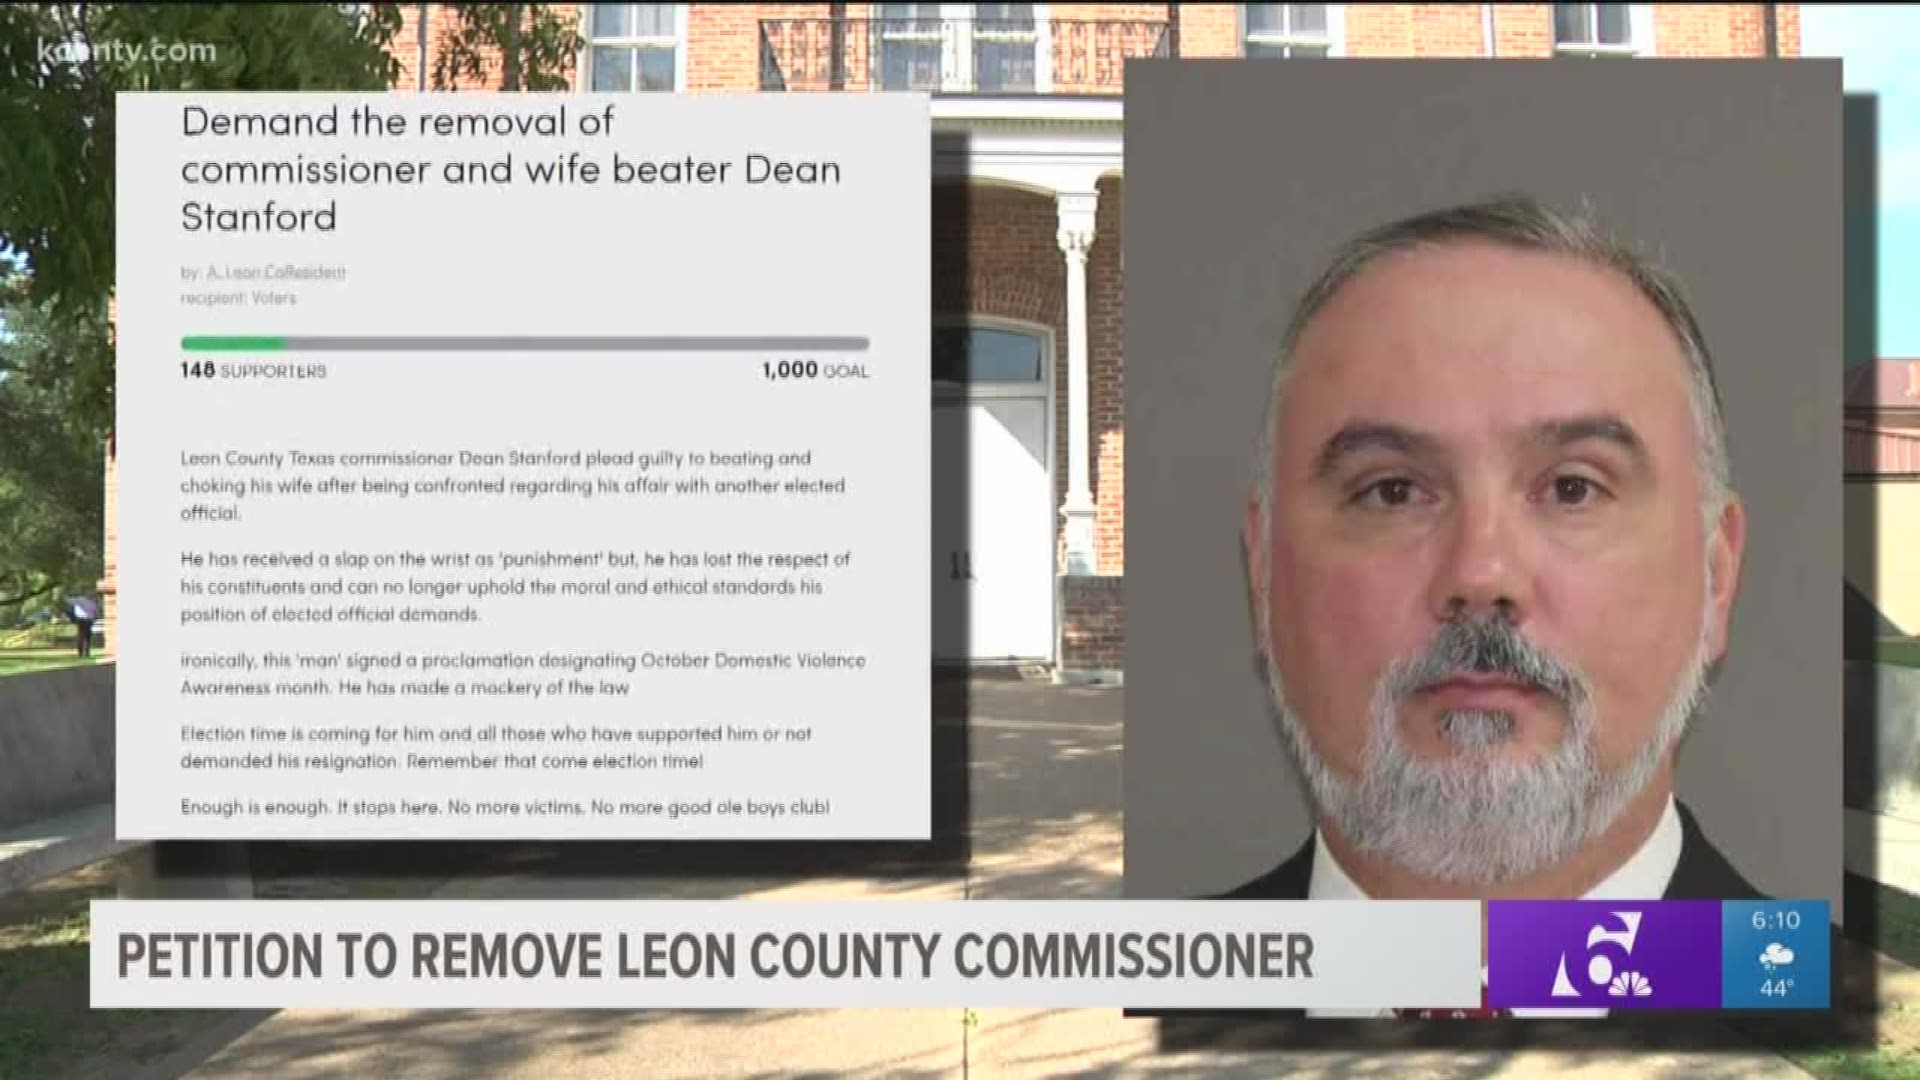 A petition started by an anonymous Leon County employee has been circulating online. The petition is asking for the removal of County Commissioner Dean Stanford.